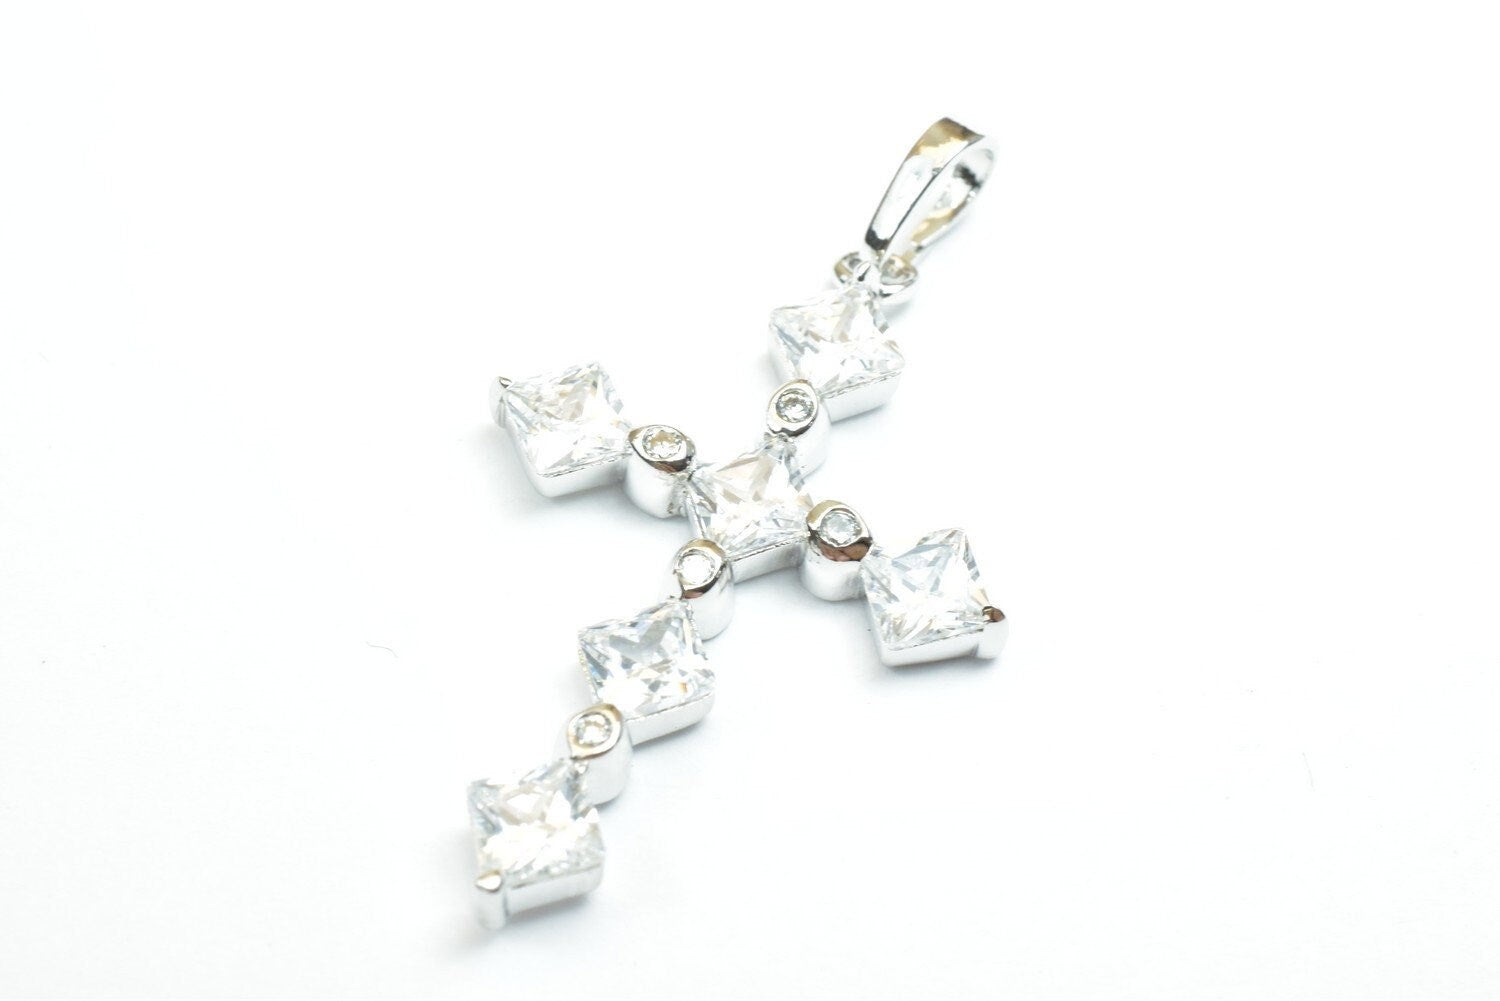 White gold filled cross pendant with cubic zircon (cz) rhinestone rhodium plated charm size 31x21mm, thickness 3mm for jewelry making rp73